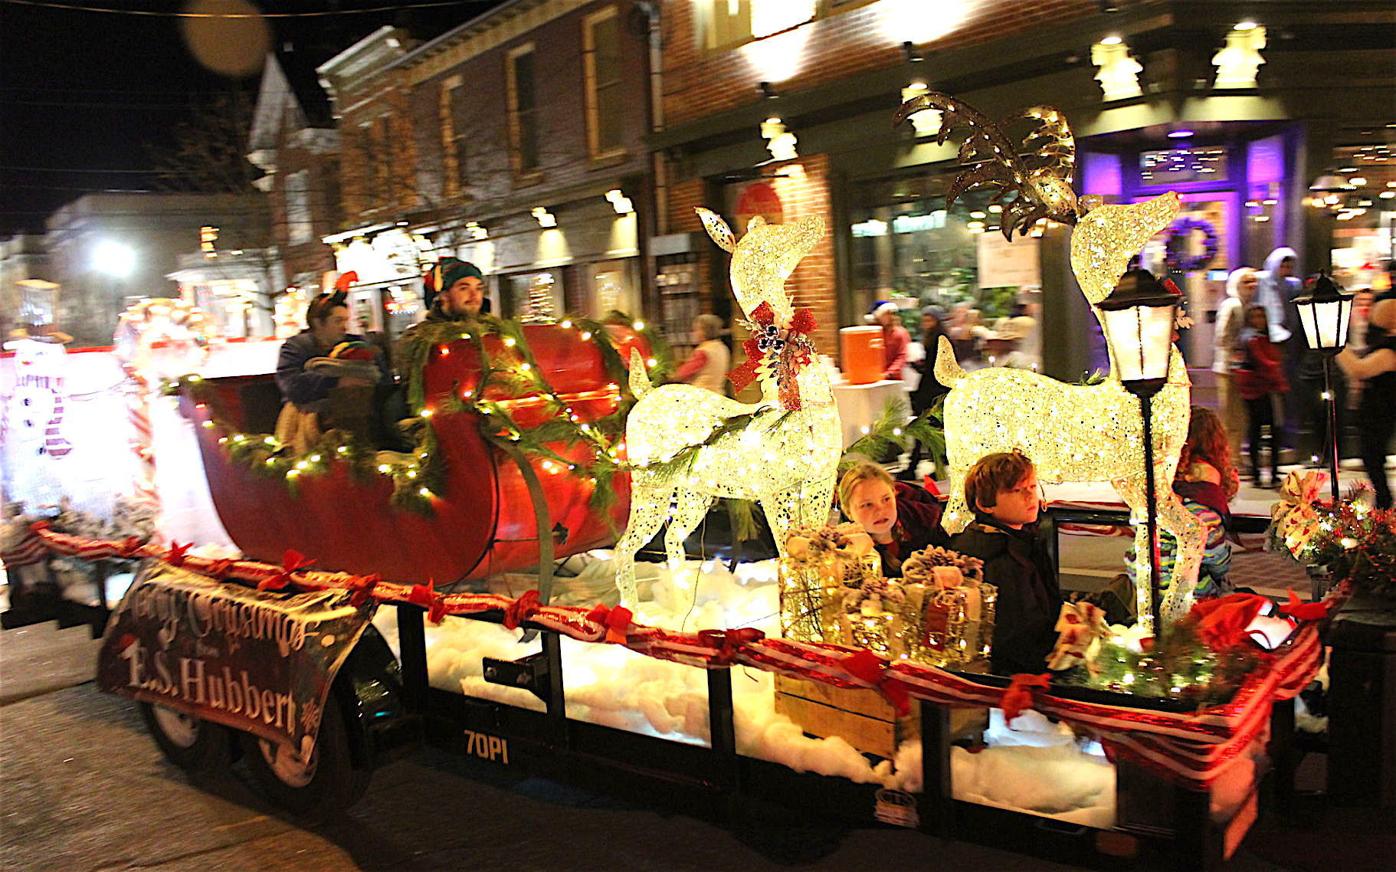 Cambridge Christmas parade features 'Past and Present' Local